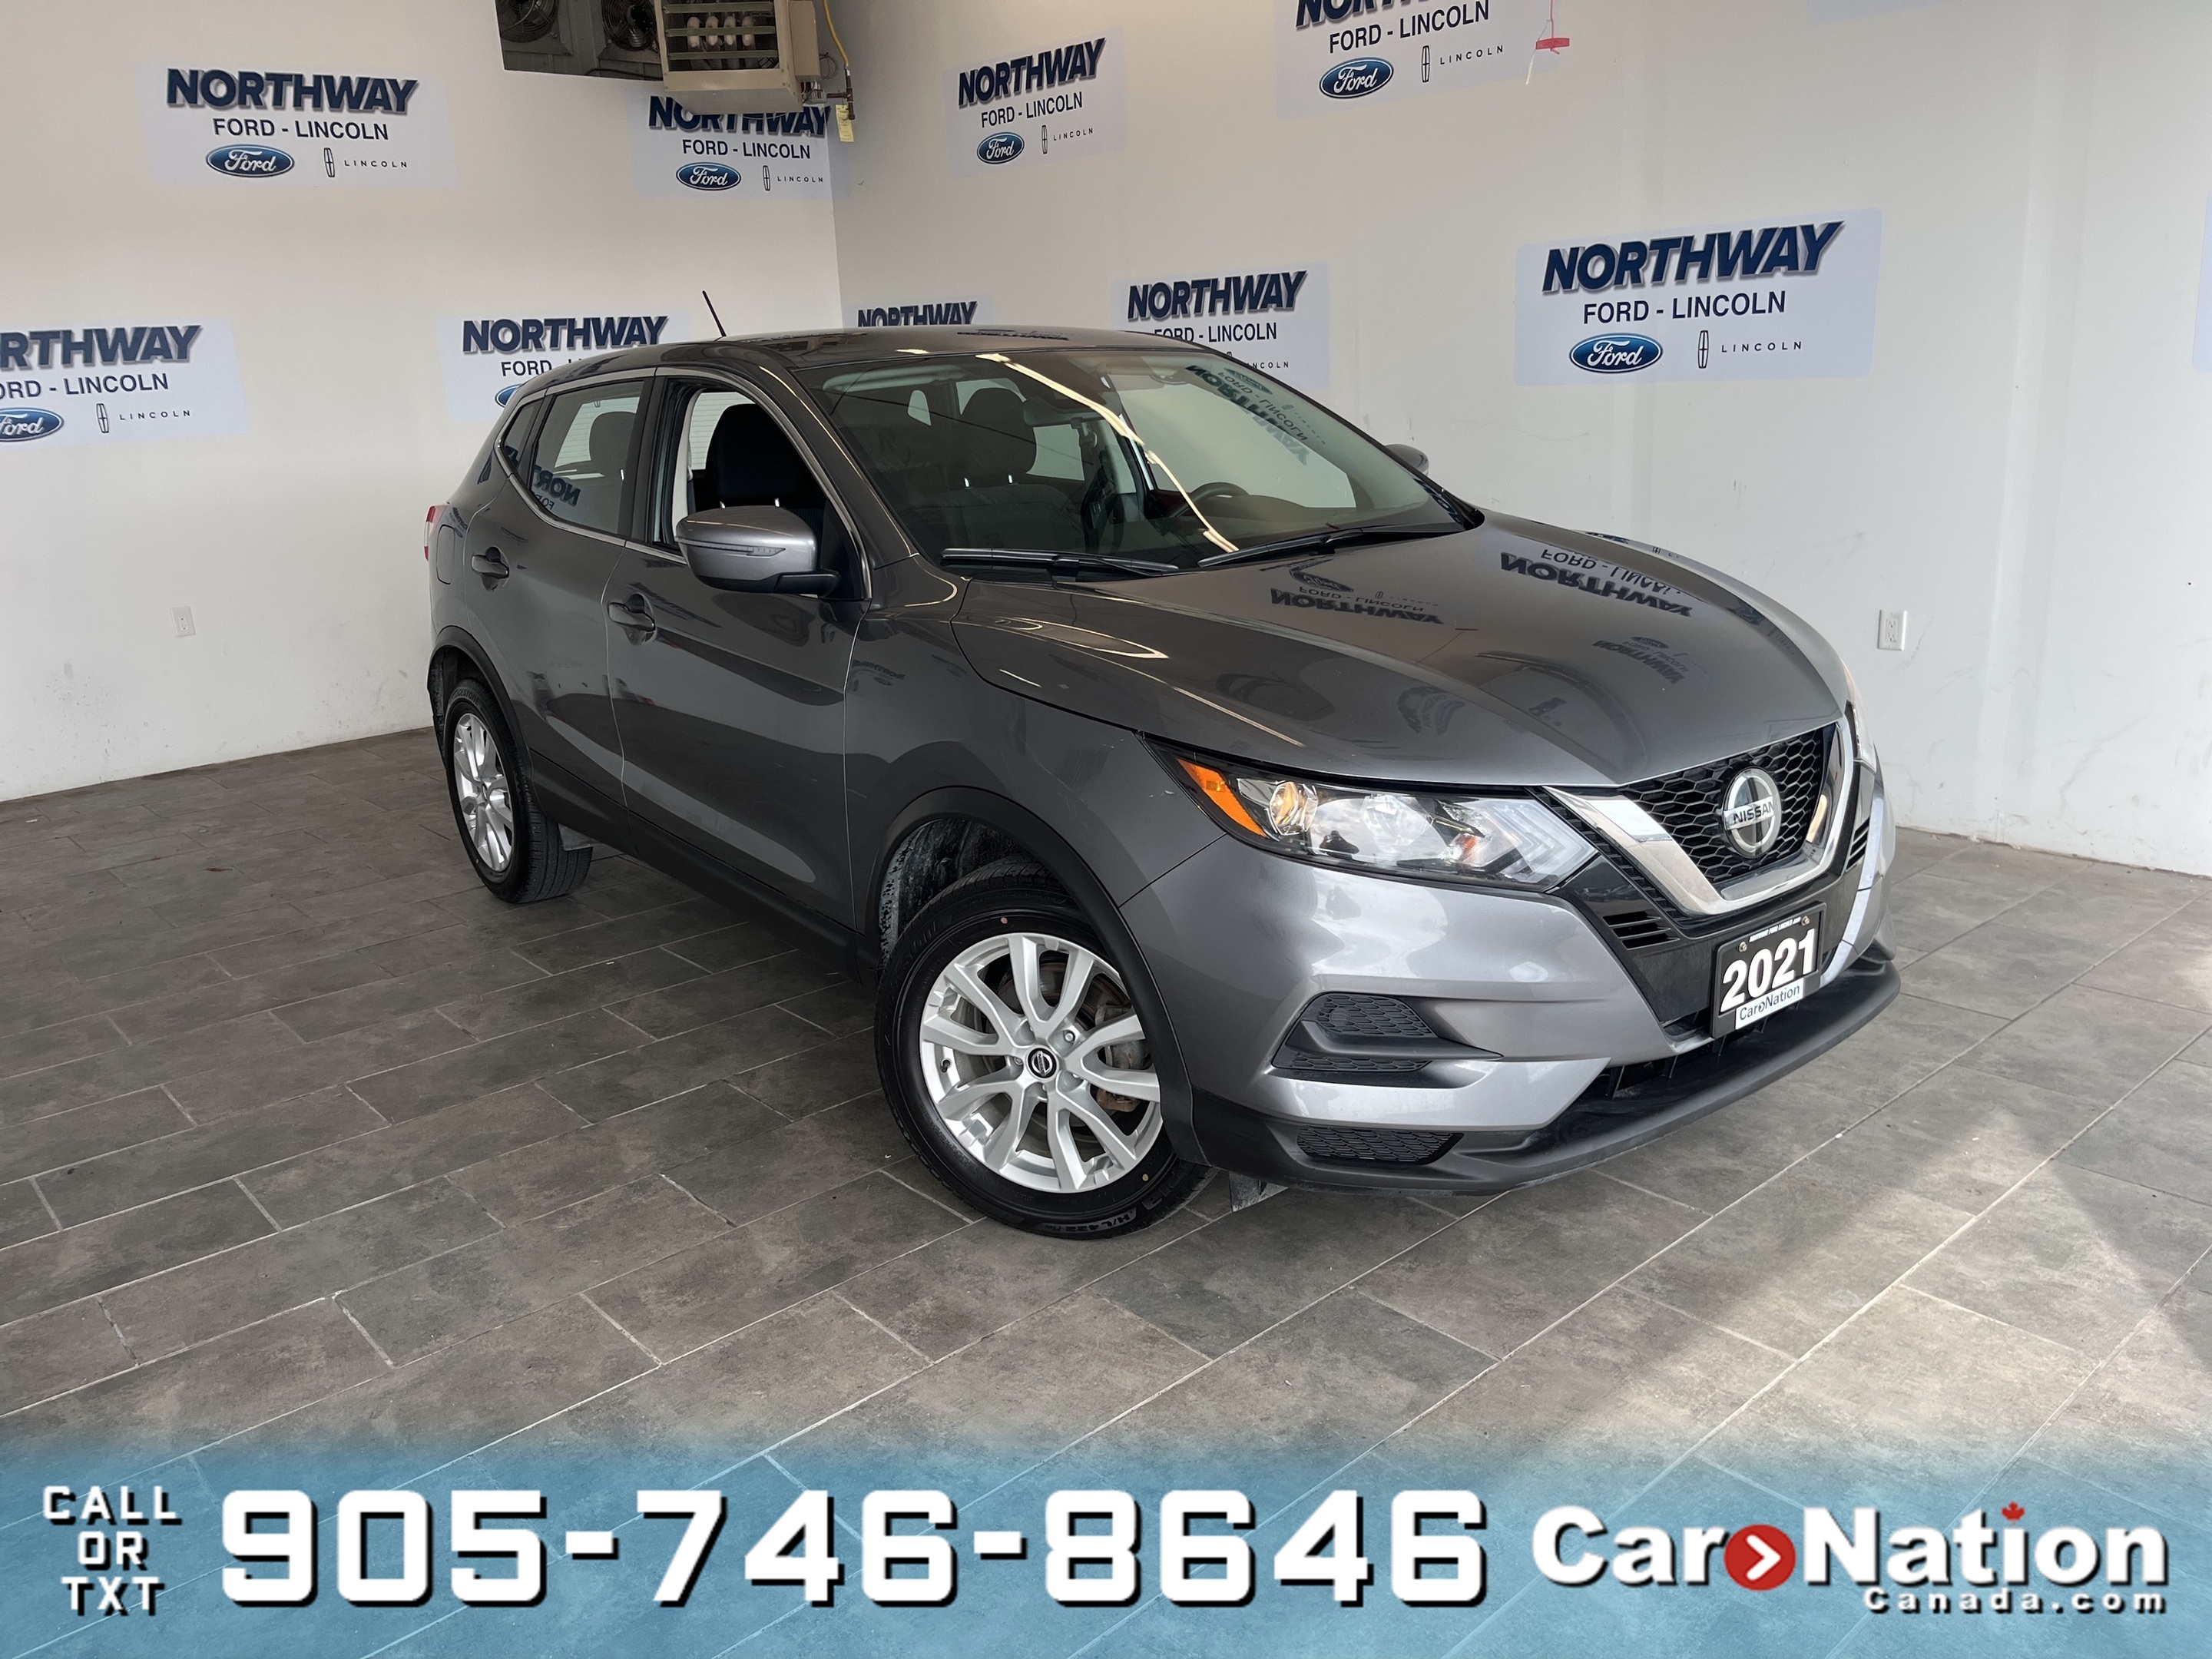 2021 Nissan Qashqai AWD | TOUCHSCREEN | REAR CAM | WE WANT YOUR TRADE!